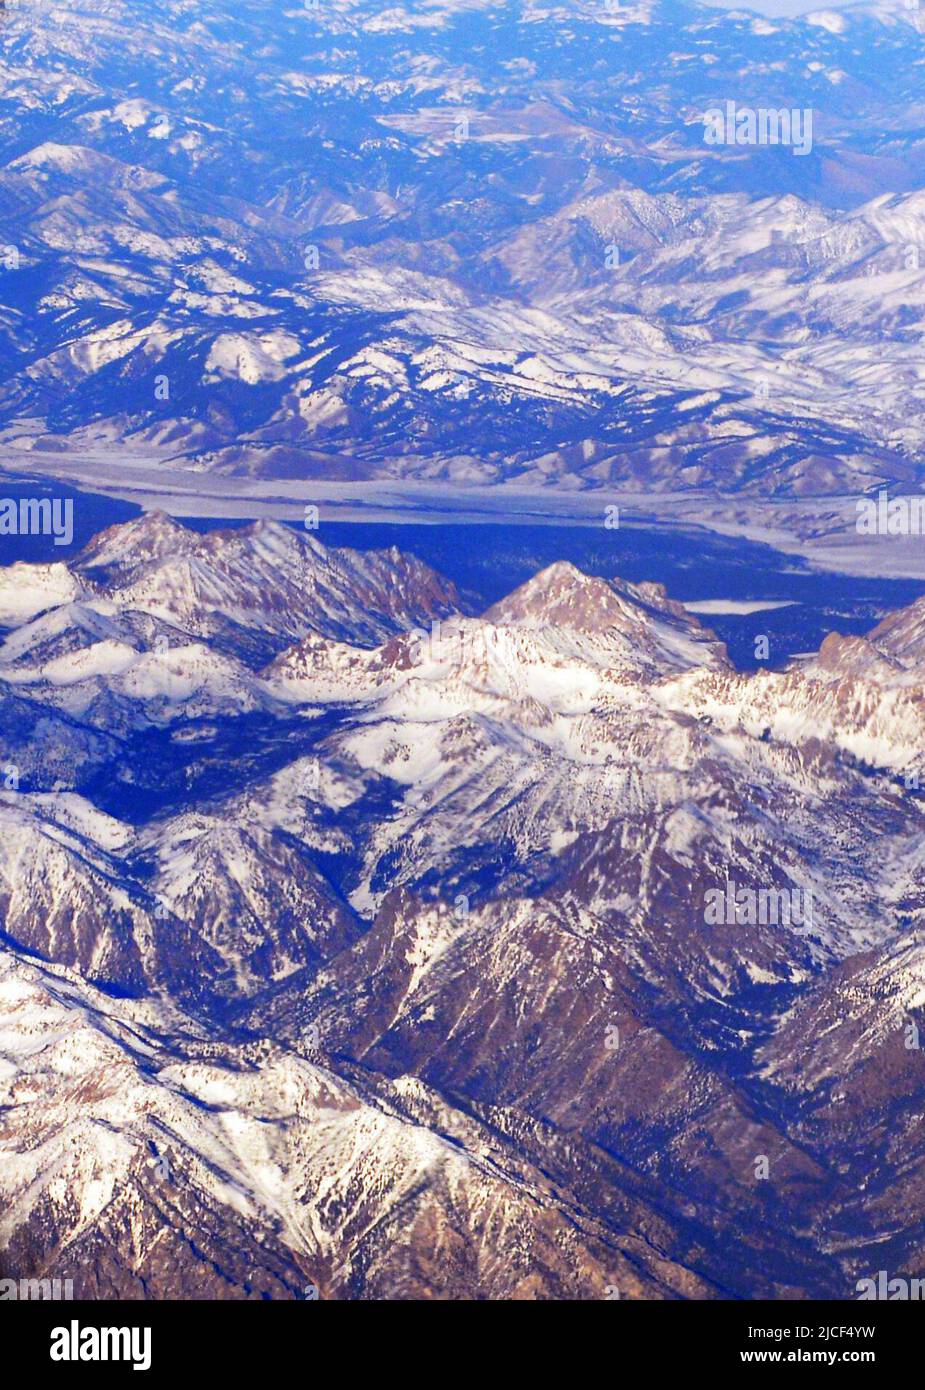 Flying over snow covered mountains in the North western part of the USA. Stock Photo